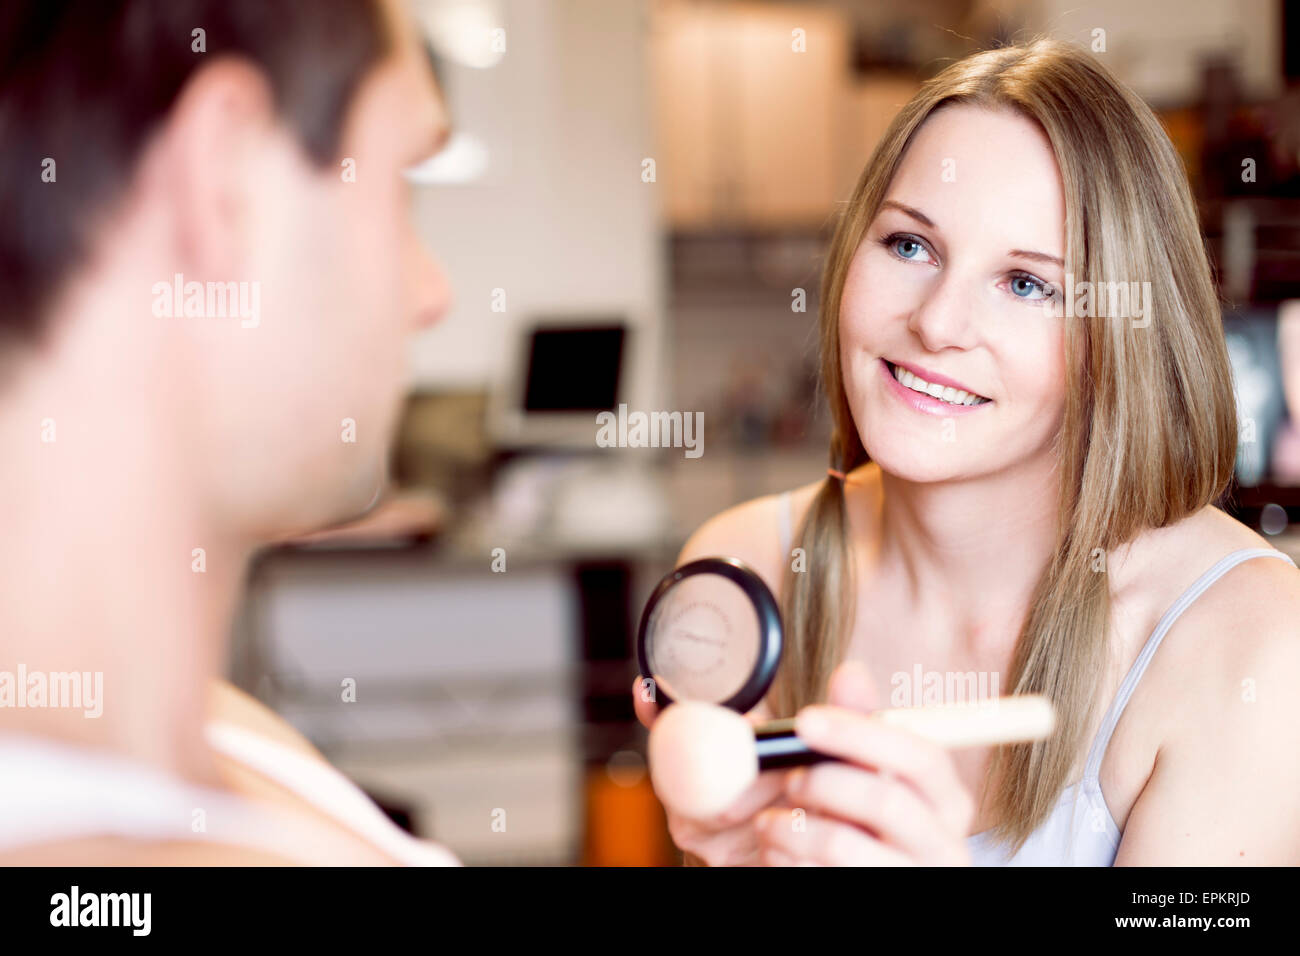 Portrait of smiling woman with beauty brush Stock Photo